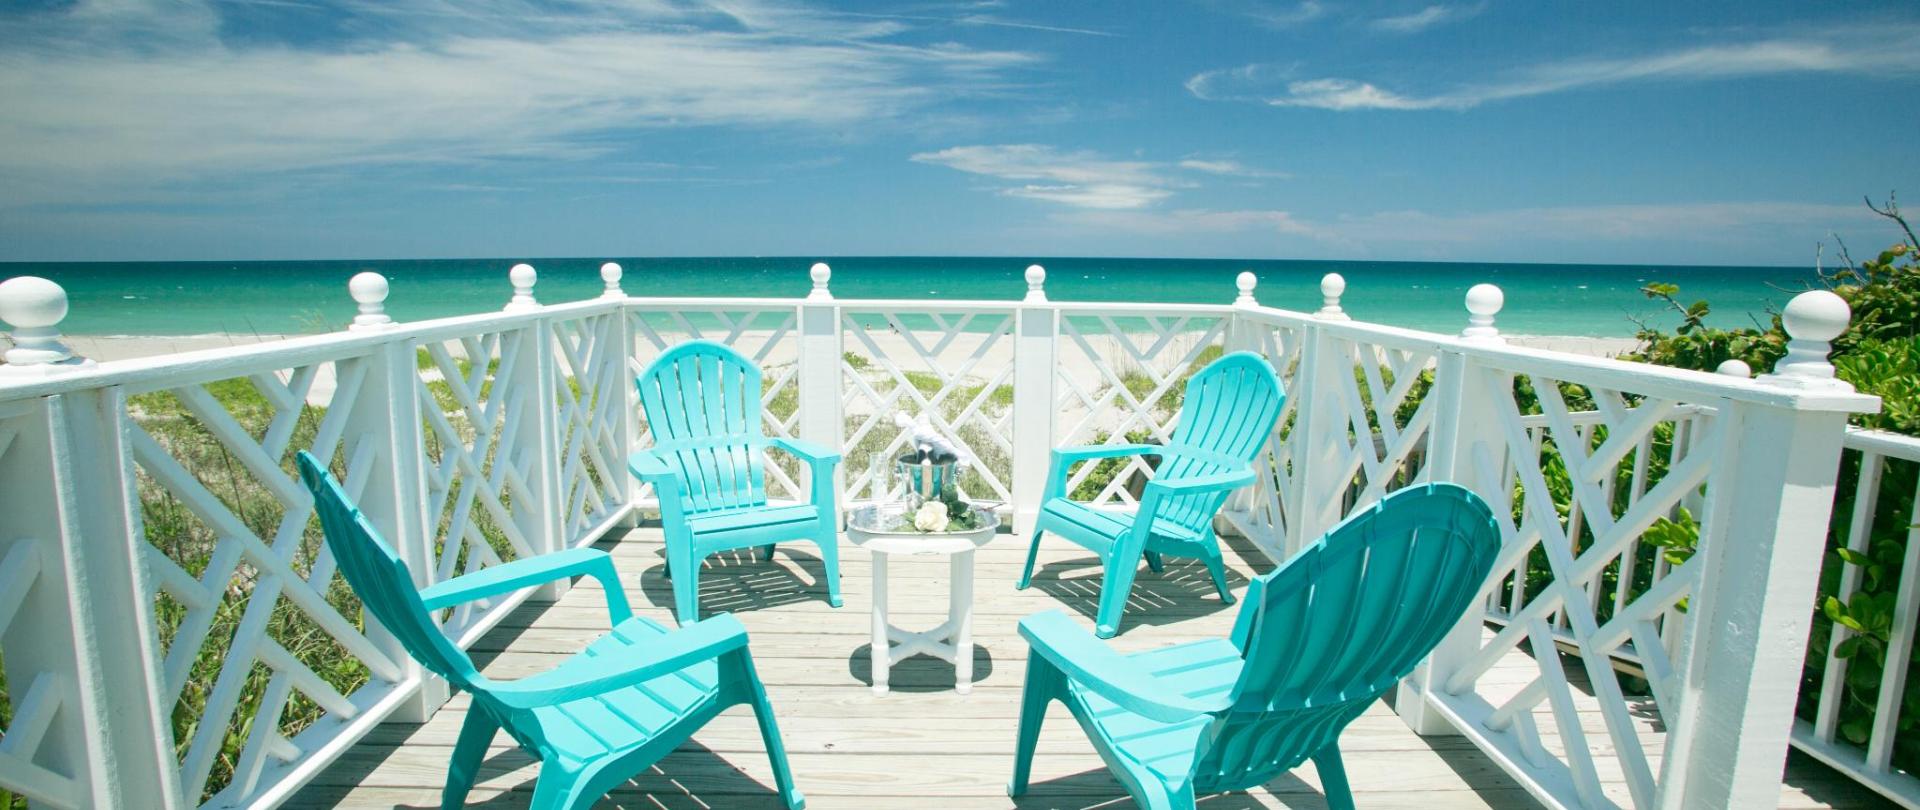 Windemere Inn by the Sea, Romantic Bed & Breakfast Located On The Melbourne Florida Beach